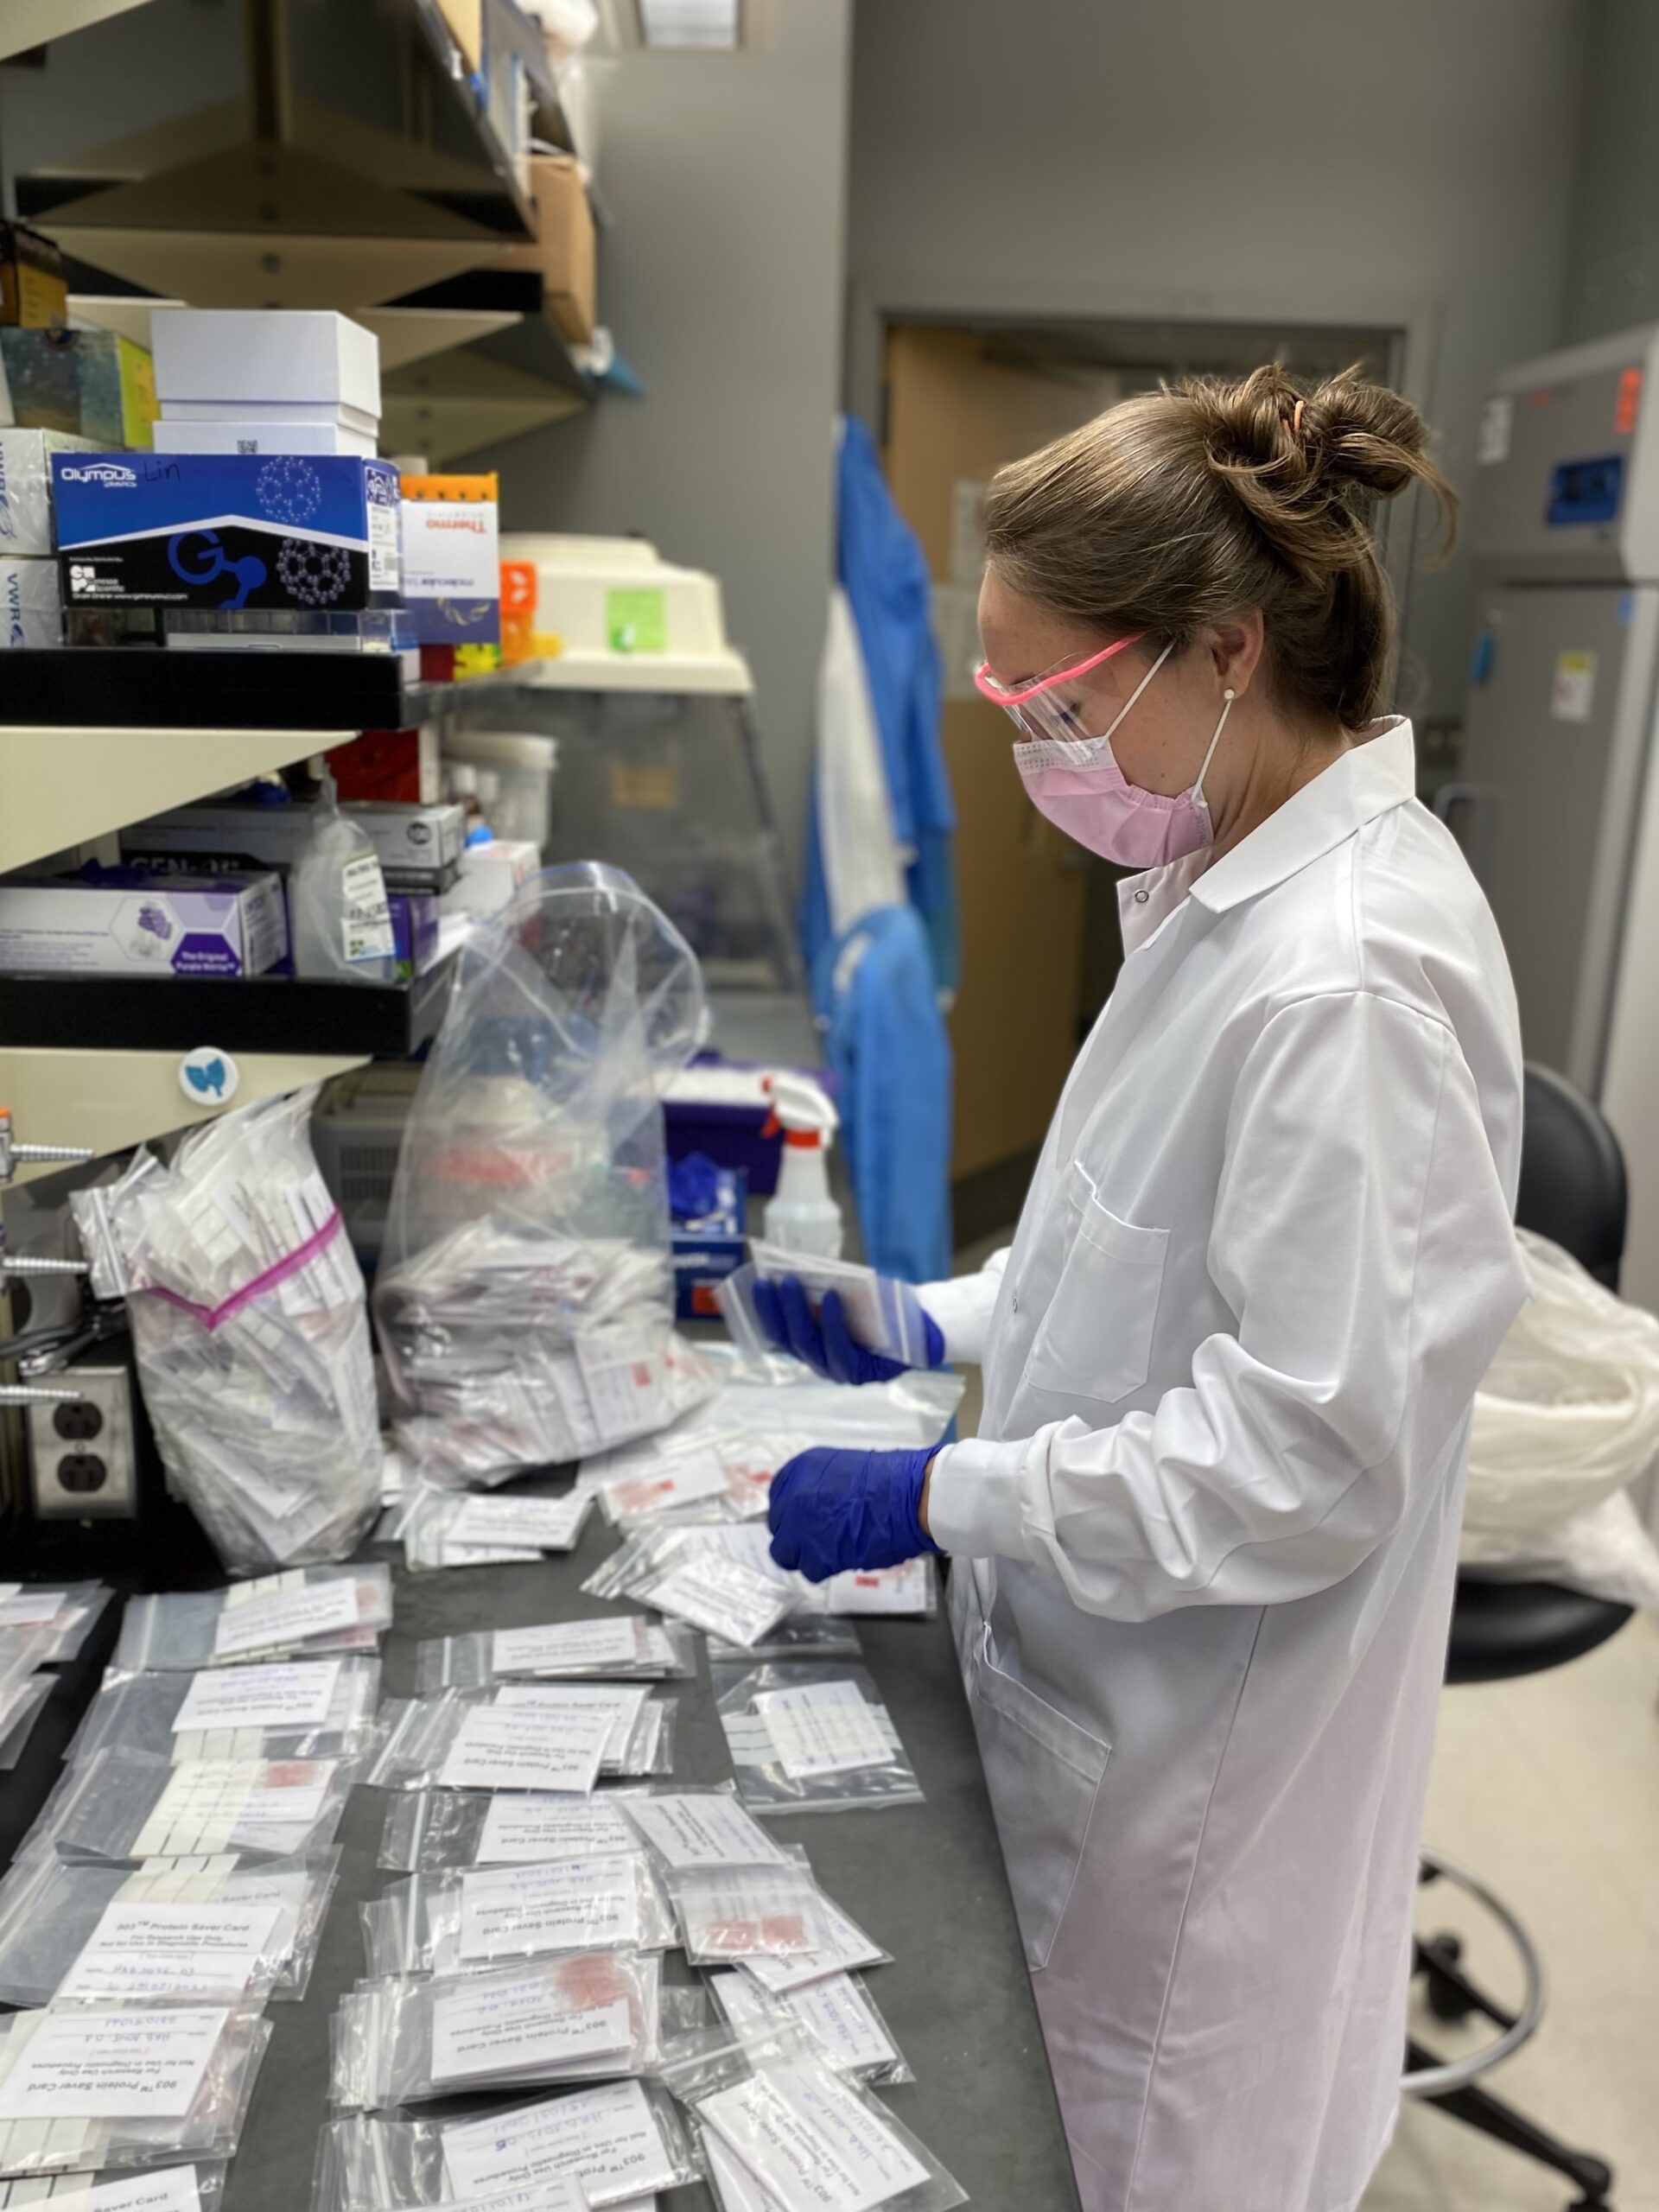 MD-PhD student Camille Morgan processes samples from her study of HBV transmission in the DRC